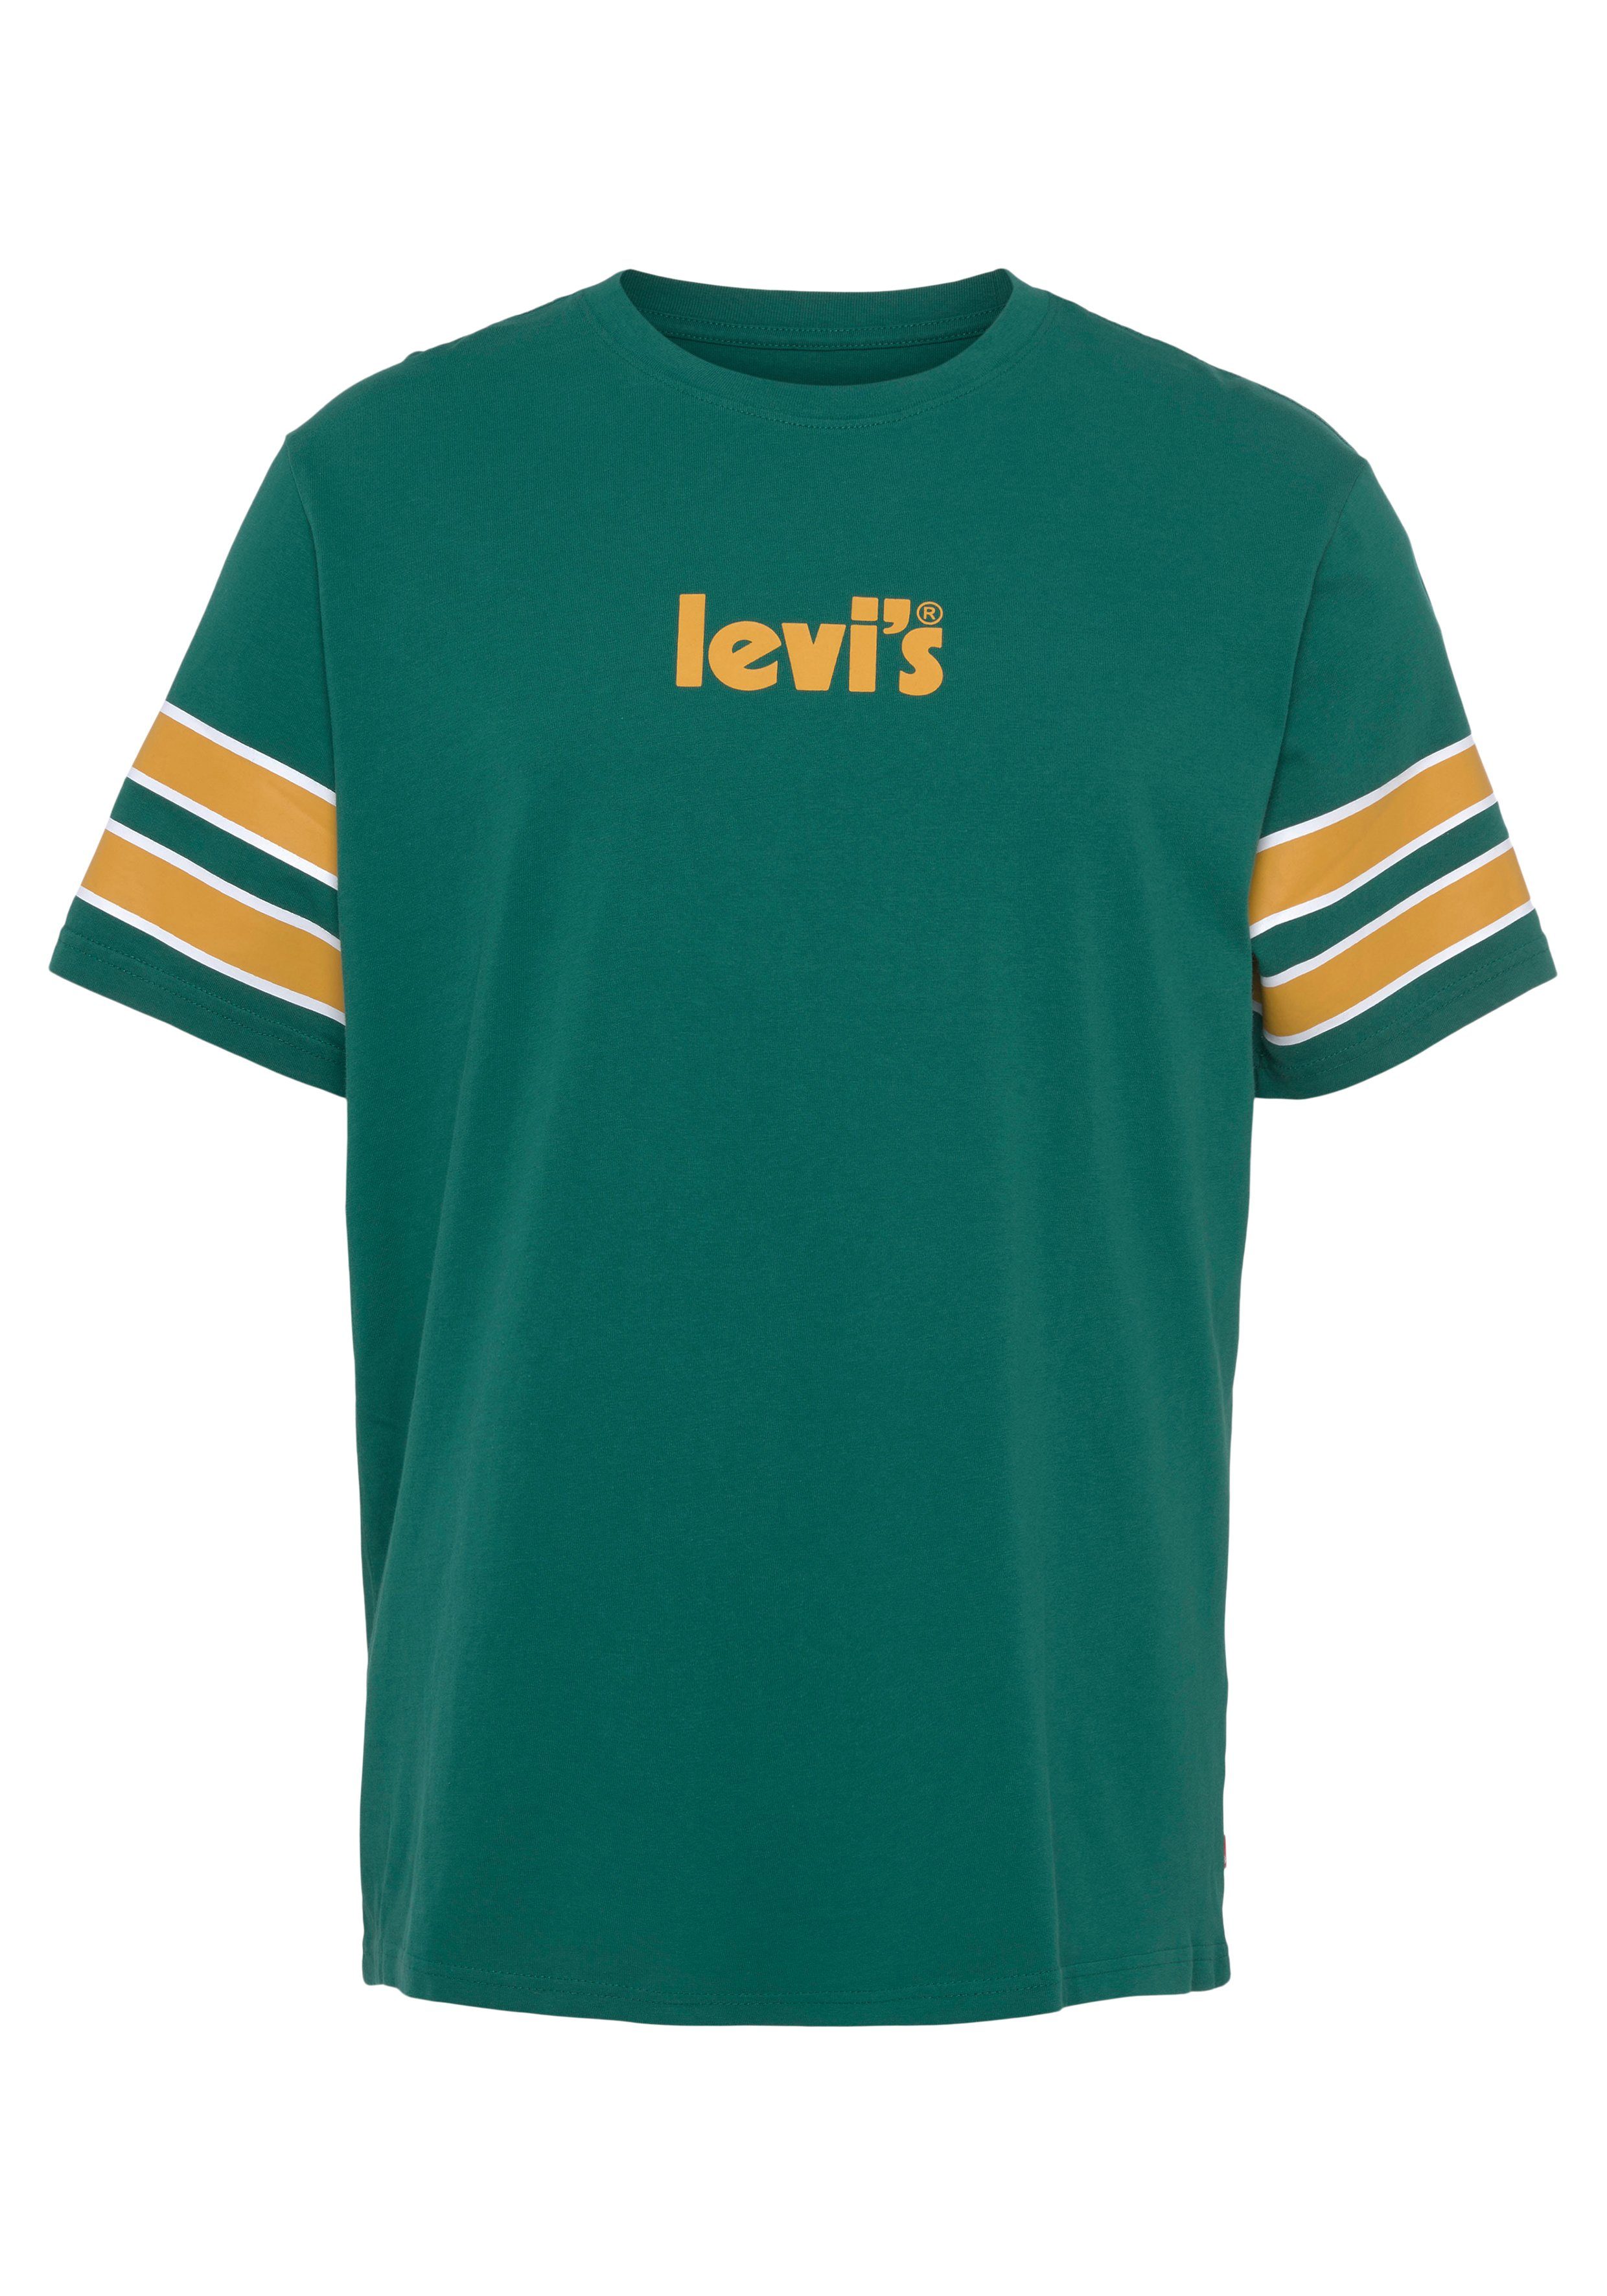 Levi's® greens Rundhalsshirt College-Look TEE FIT RELAXED im